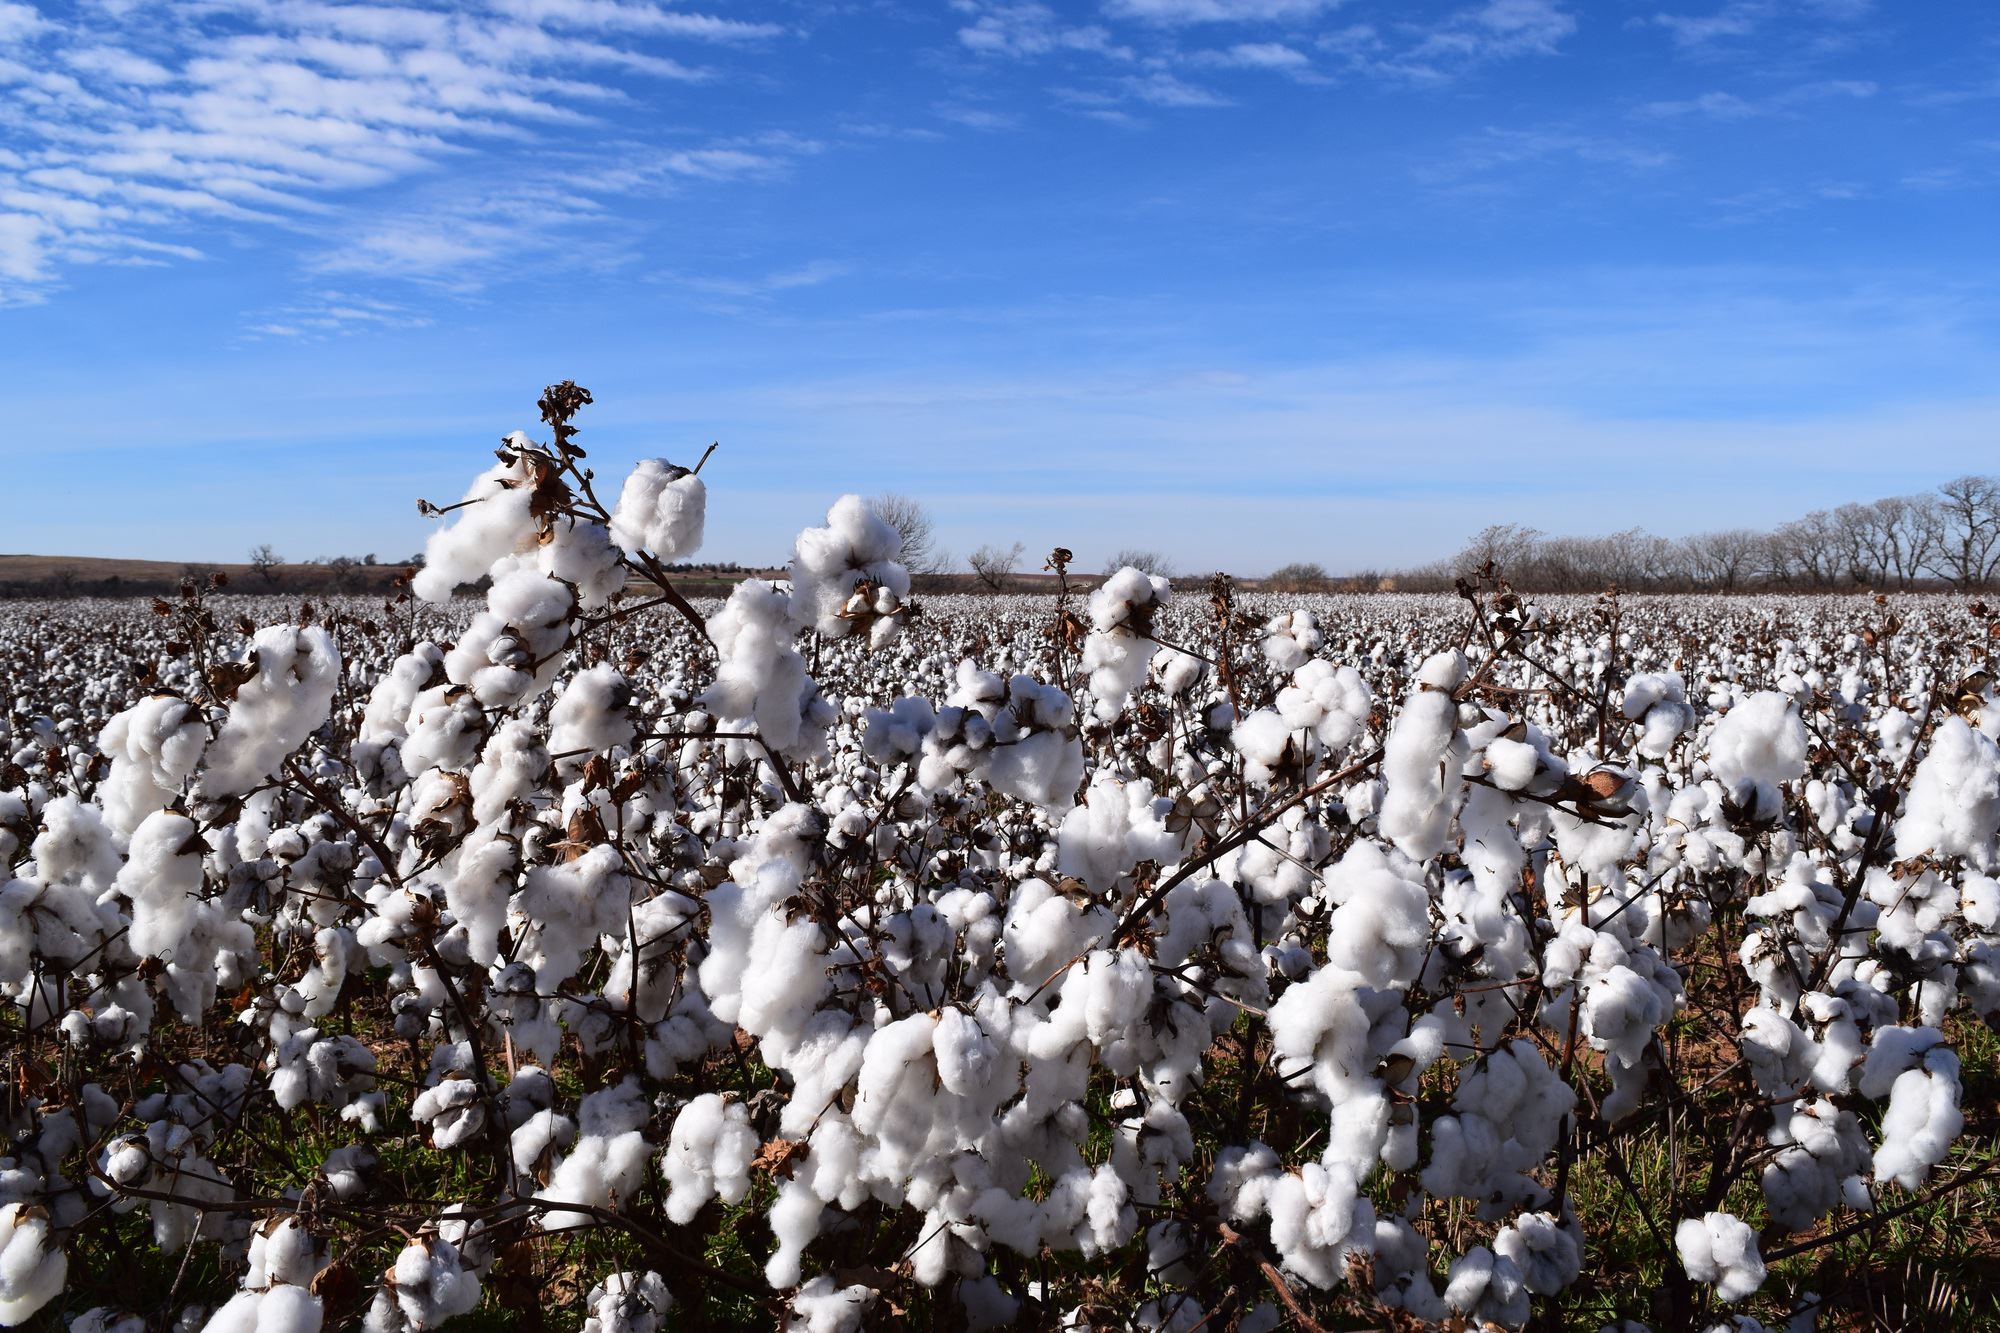 A view of a cotton field, with fluffy white cotton bolls hanging from the plants and a few scattered clouds decorating the bright blue sky in the background